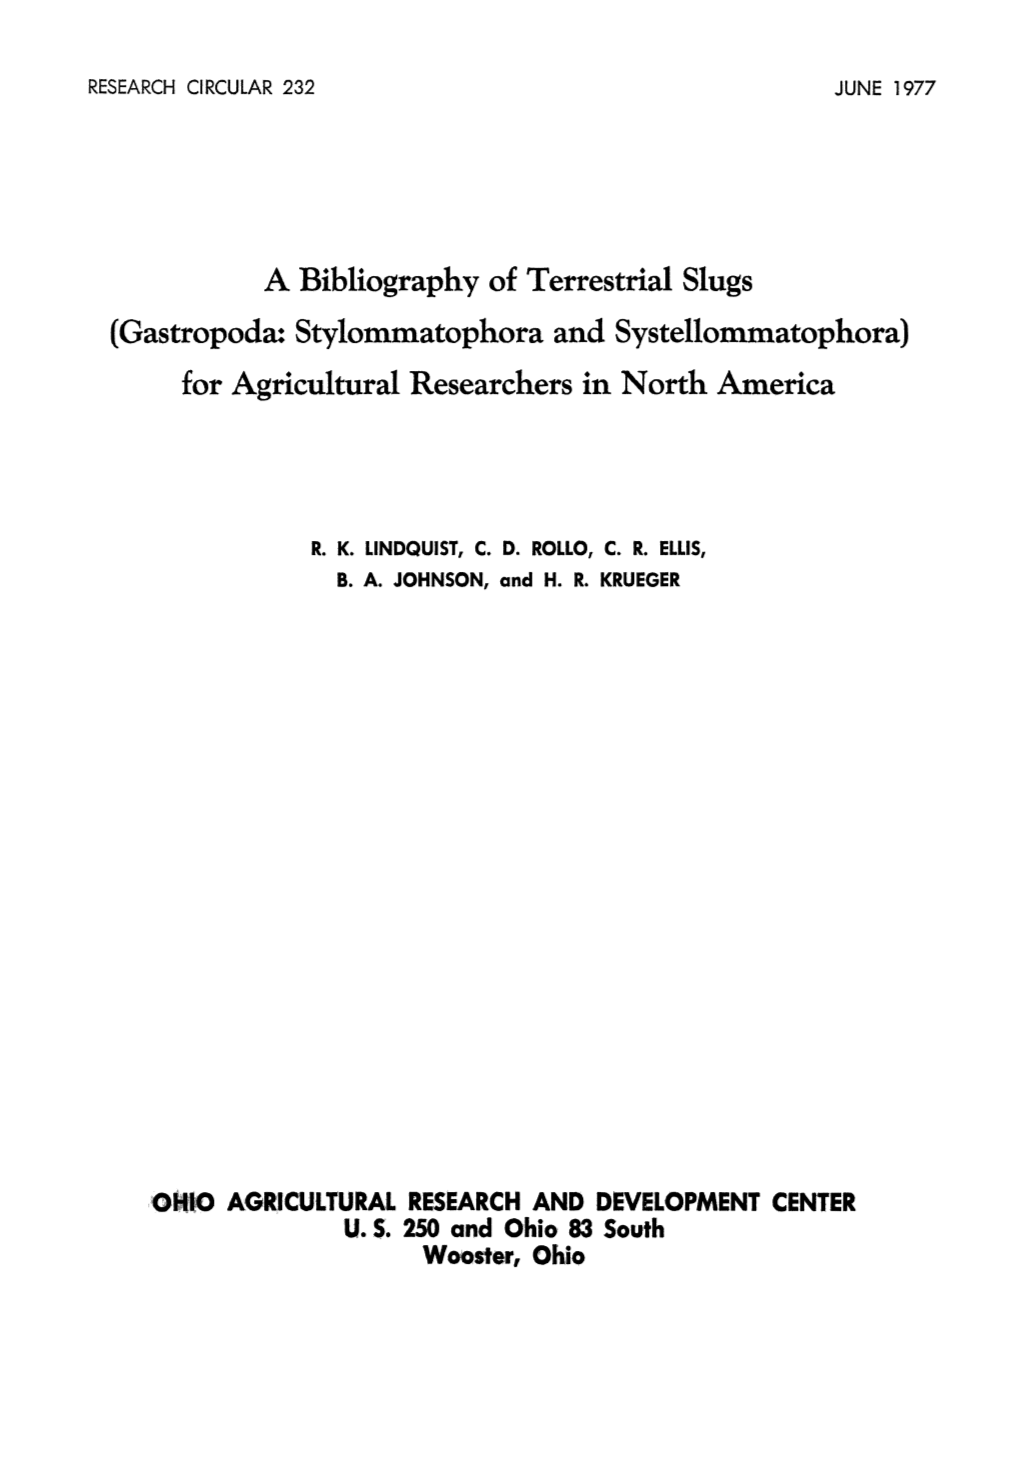 A Bibliography of Terrestrial Slugs (Gastropoda: Stylommatophora and Systellommatophora) for Agricultural Researchers in North America